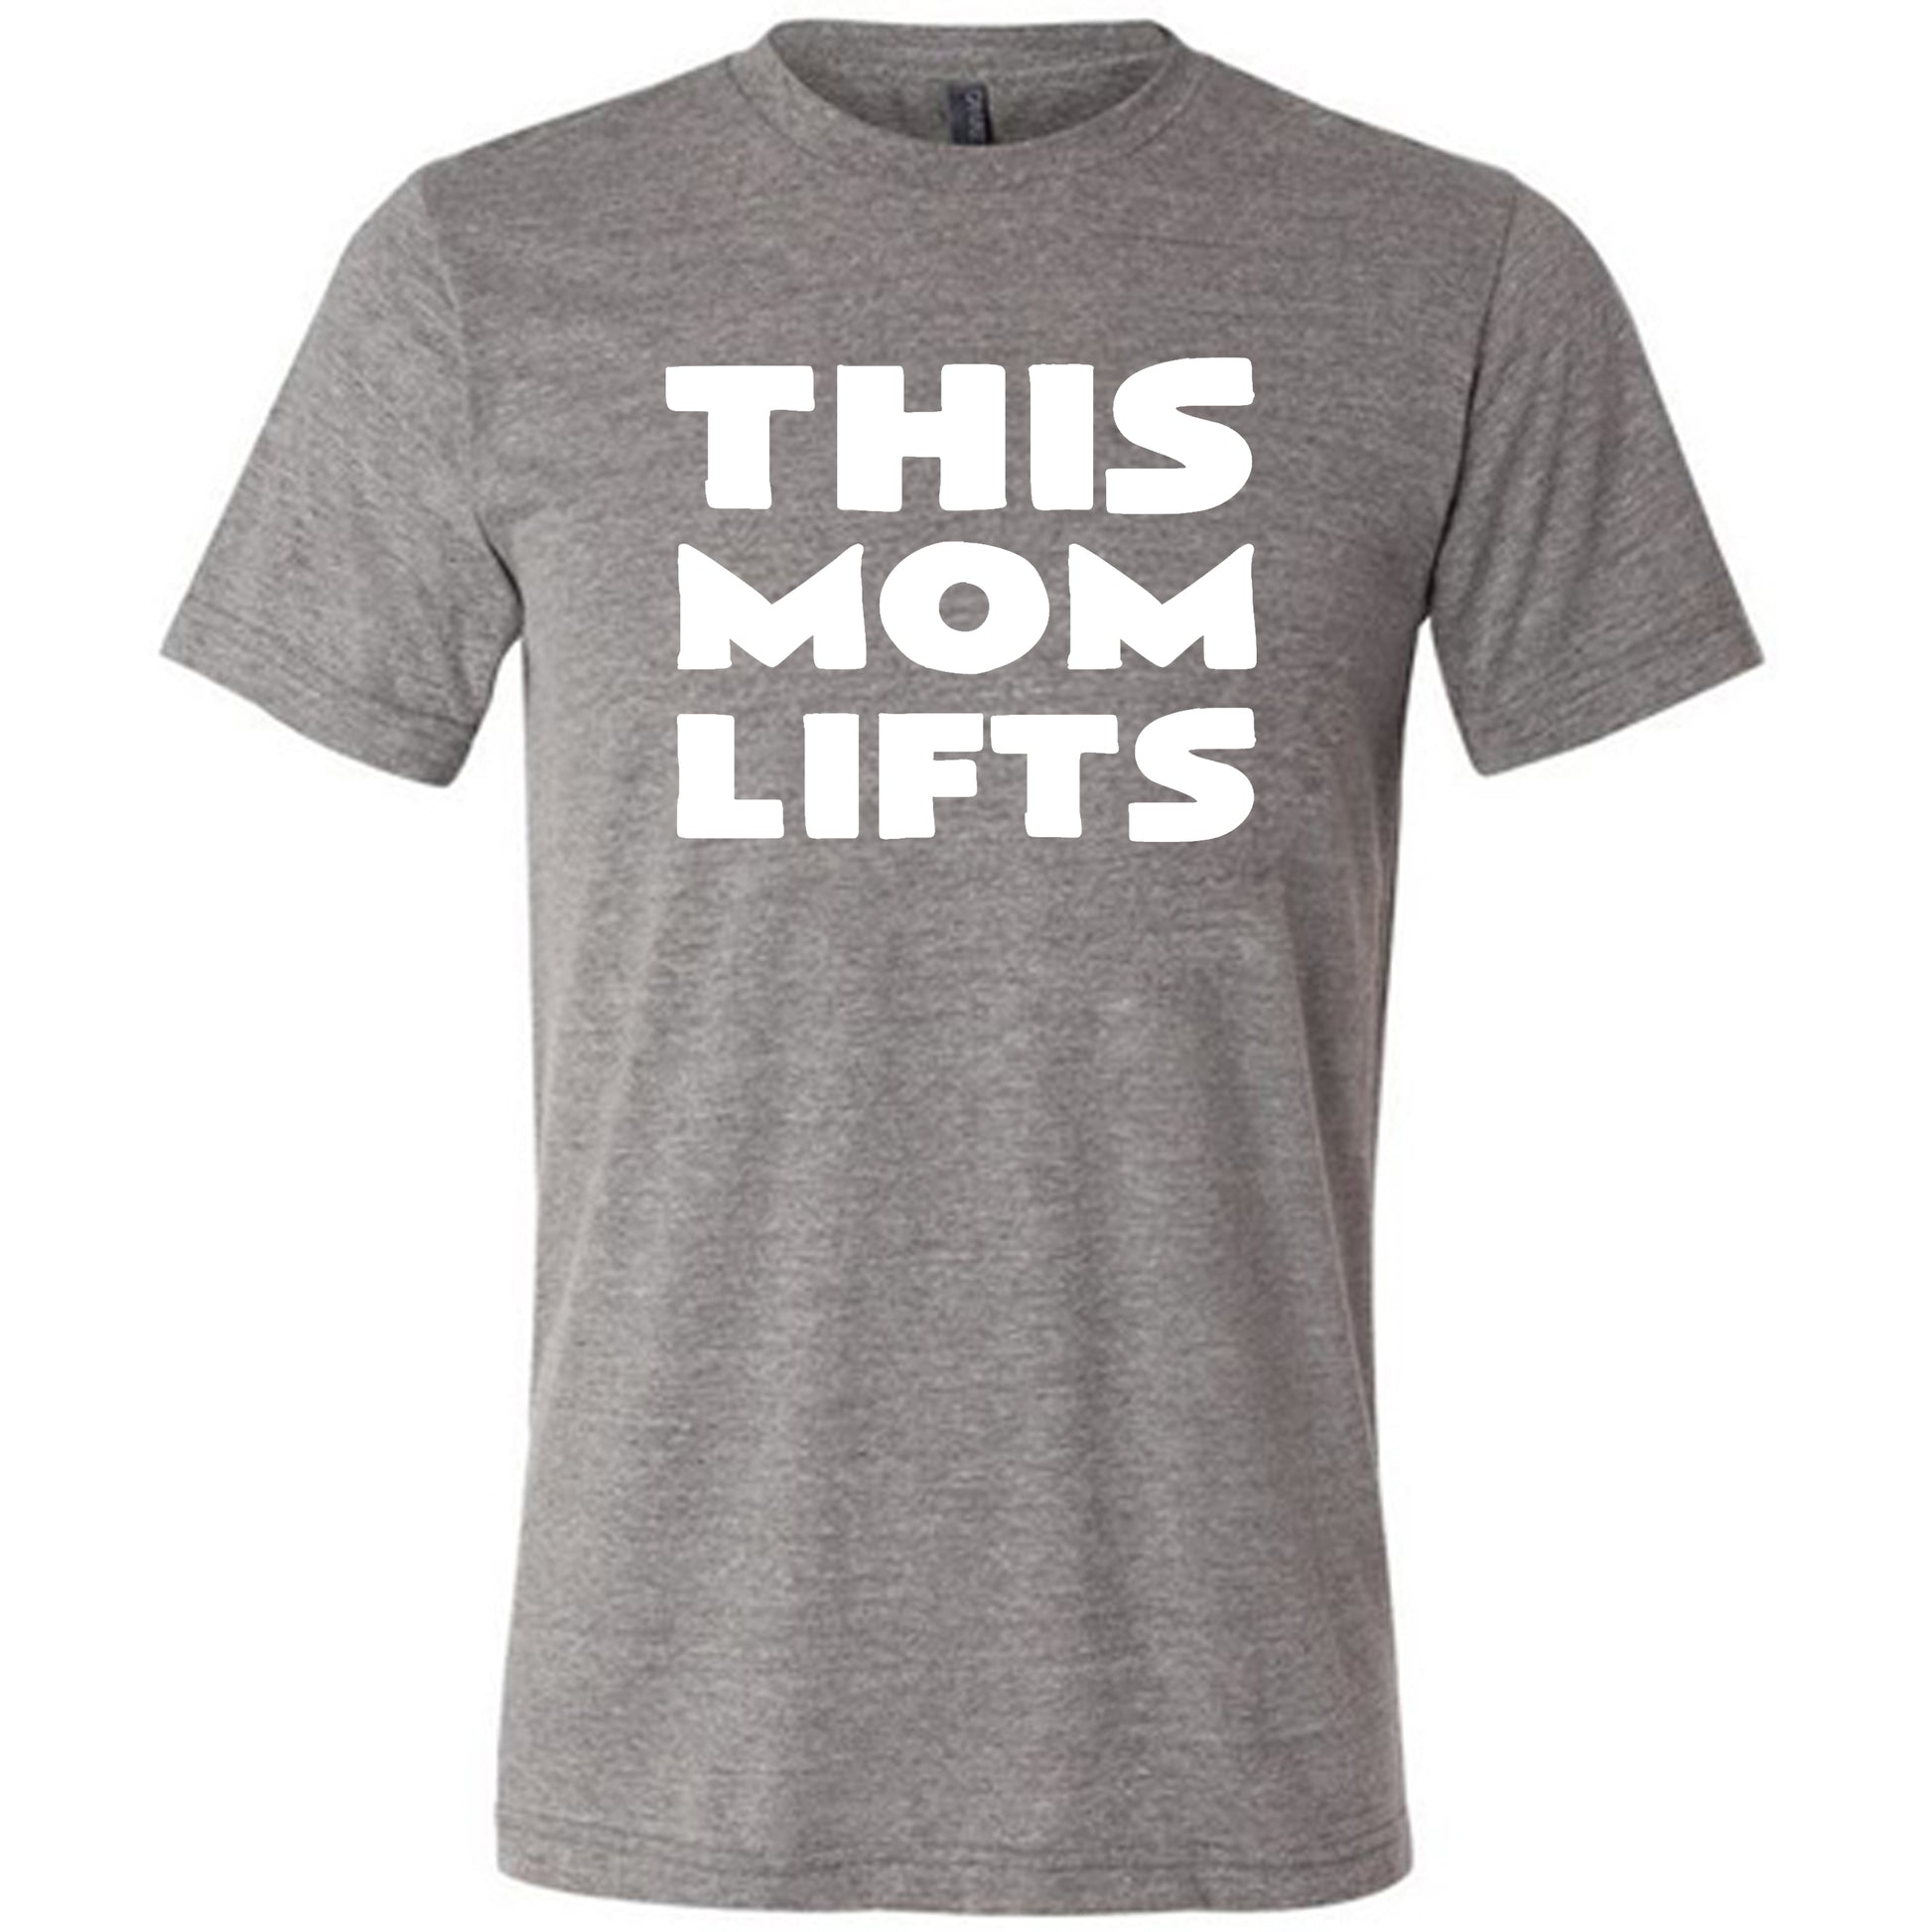 grey unisex tee shirt with the saying "this mom lifts" in the center in white lettering